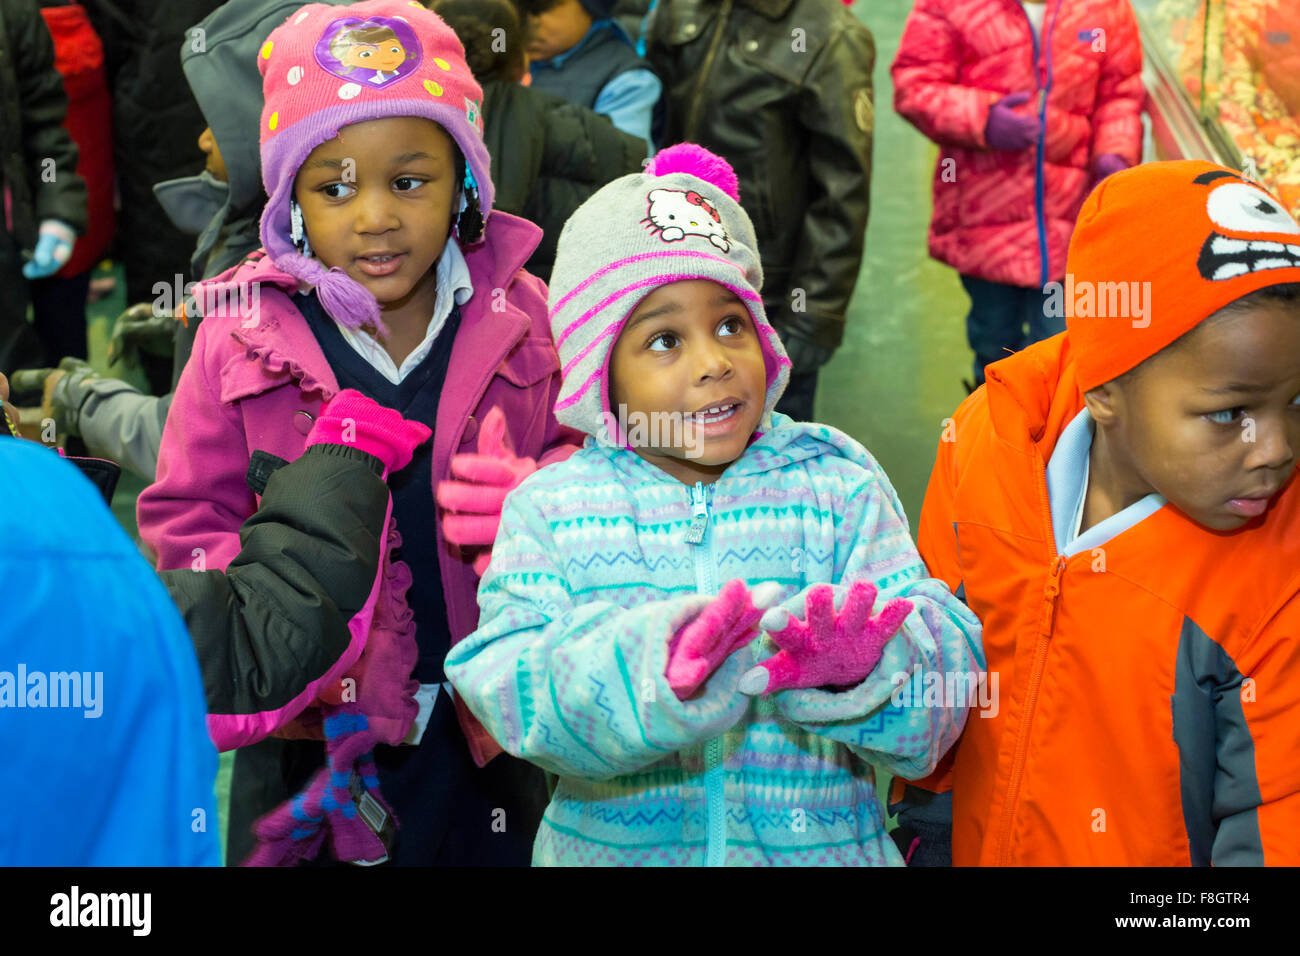 Detroit, Michigan USA. 9th December 2015. Children at Dossin Elementary School dressed to go outside to the playground wearing new mittens they have just received from a charity called Mittens for Detroit. The charity is distributing mittens to 26,000 Detroit Public Schools elementary students; most were donated by employees of Fiat Chrysler Automobiles. Credit:  Jim West/Alamy Live News Stock Photo